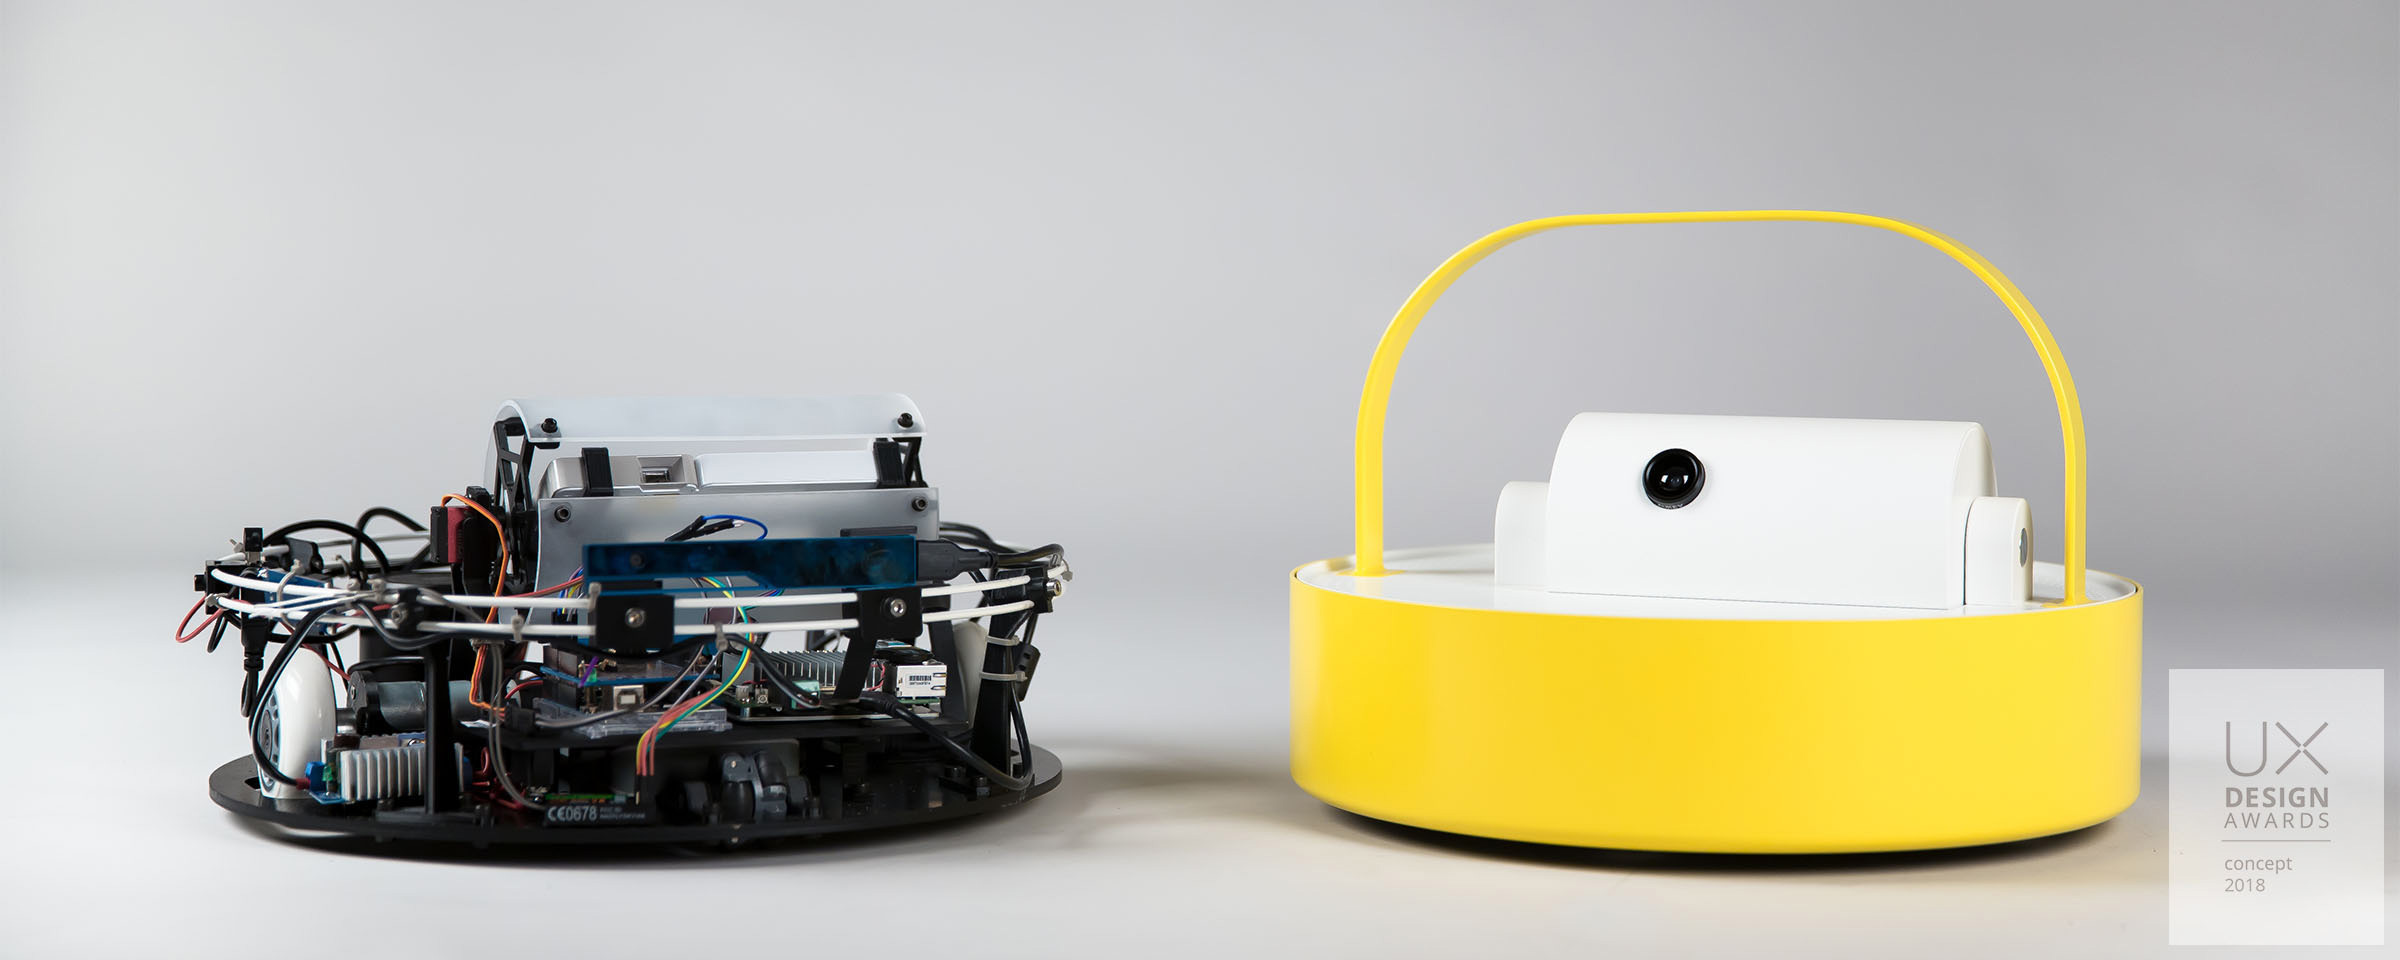 The robot Kopernikus supports elderly people with cognitive or physical disabilities